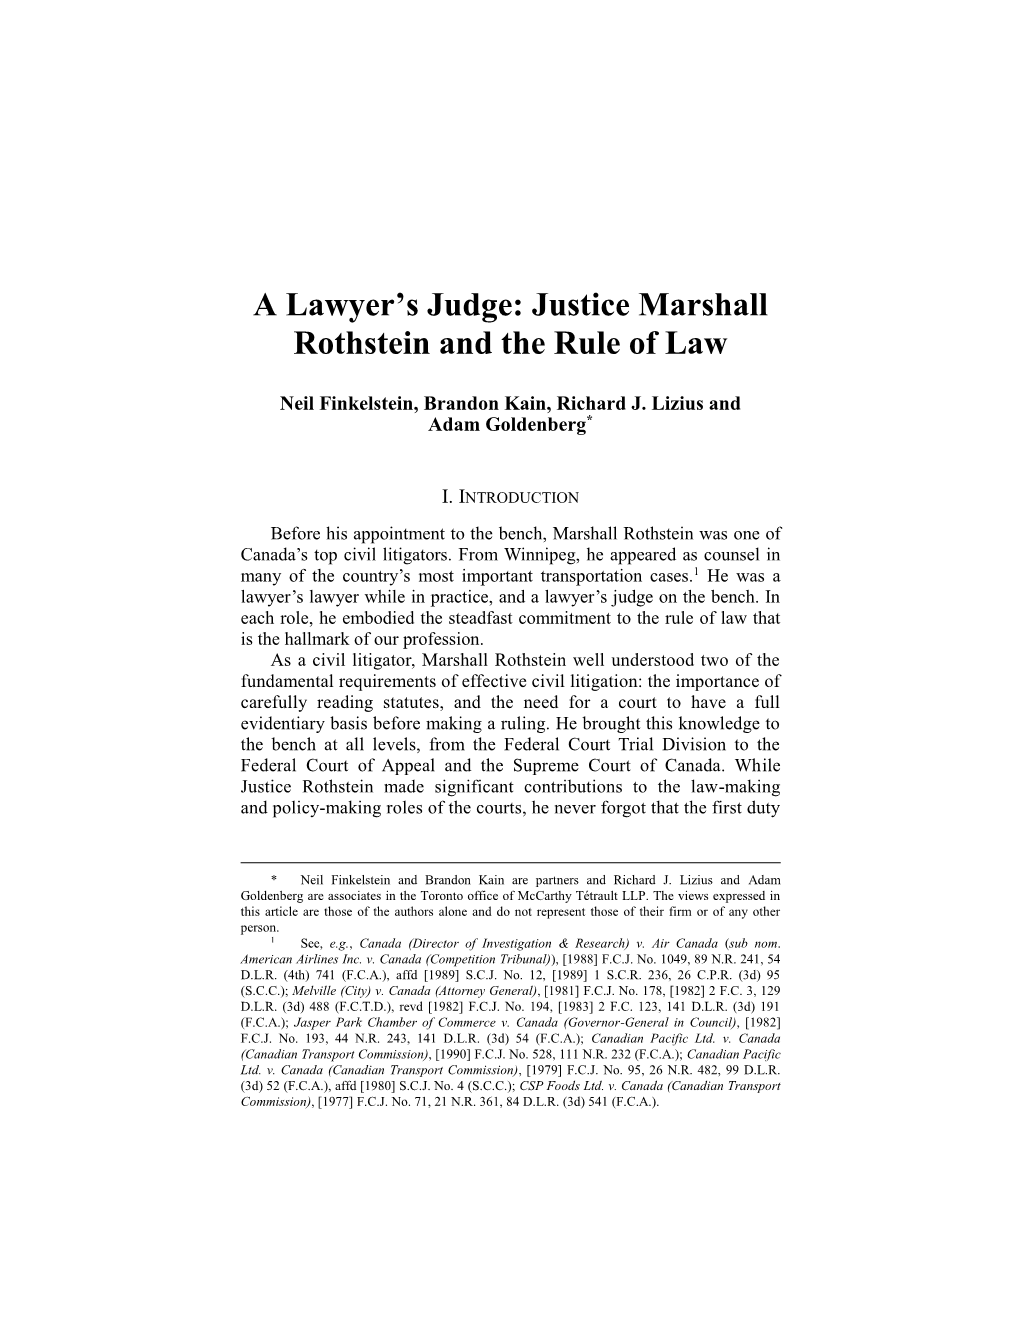 A Lawyer's Judge: Justice Marshall Rothstein and the Rule Of